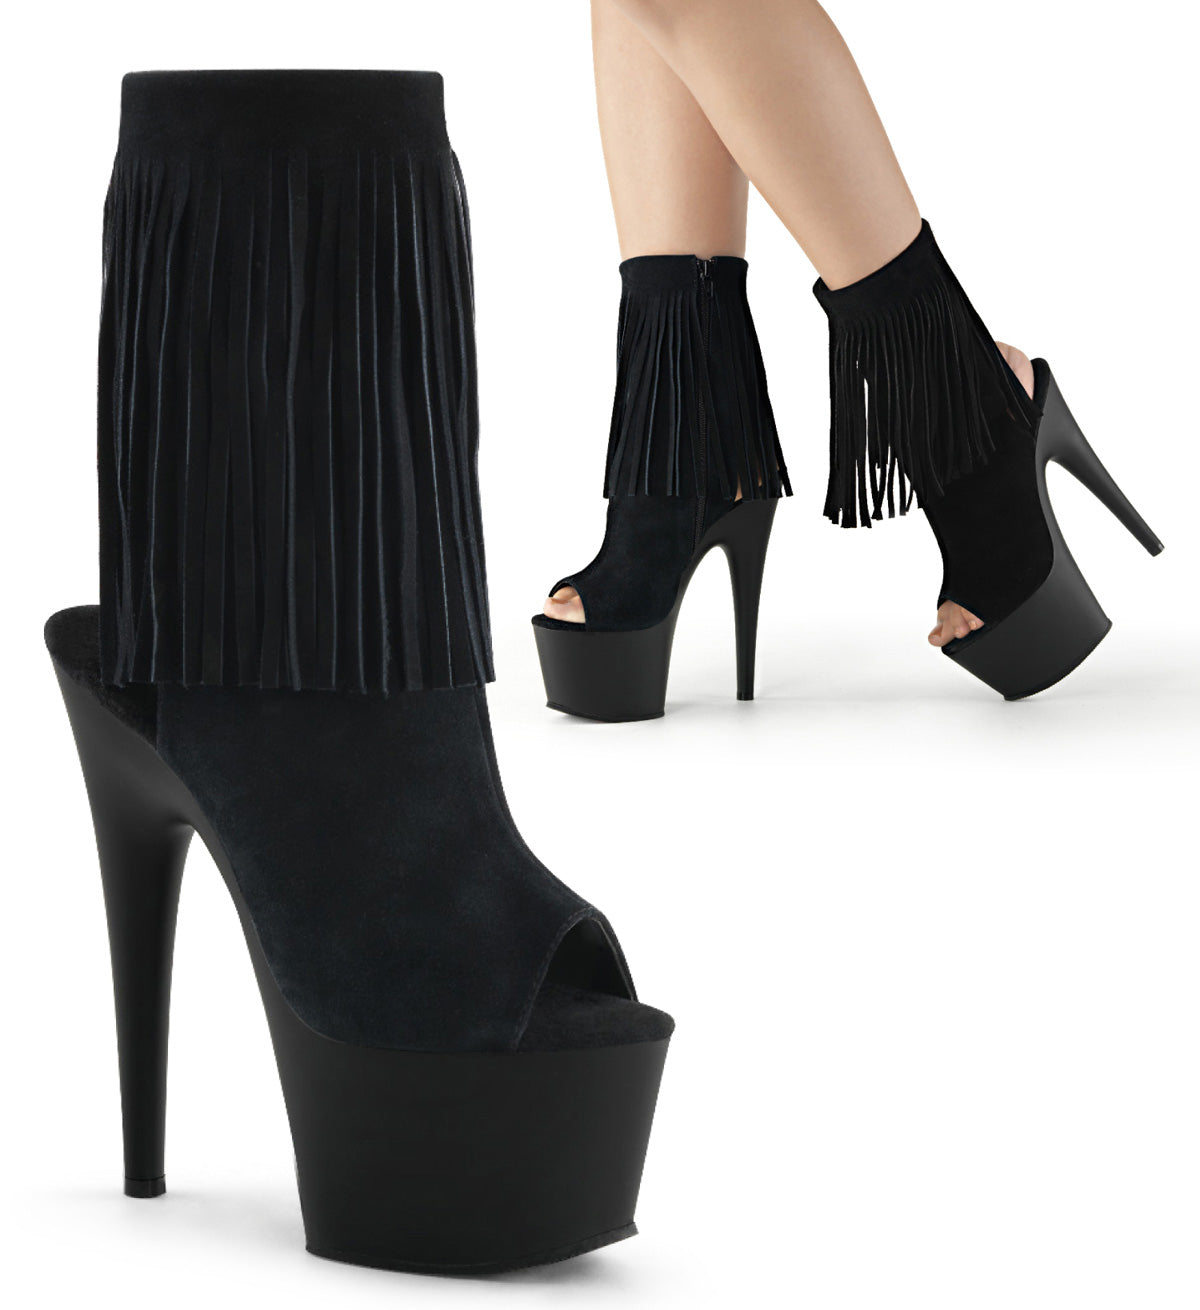 ADORE-1019 7 Inch Heel Black Suede Exotic Dancing Ankle Boot-Pleaser- Sexy Shoes